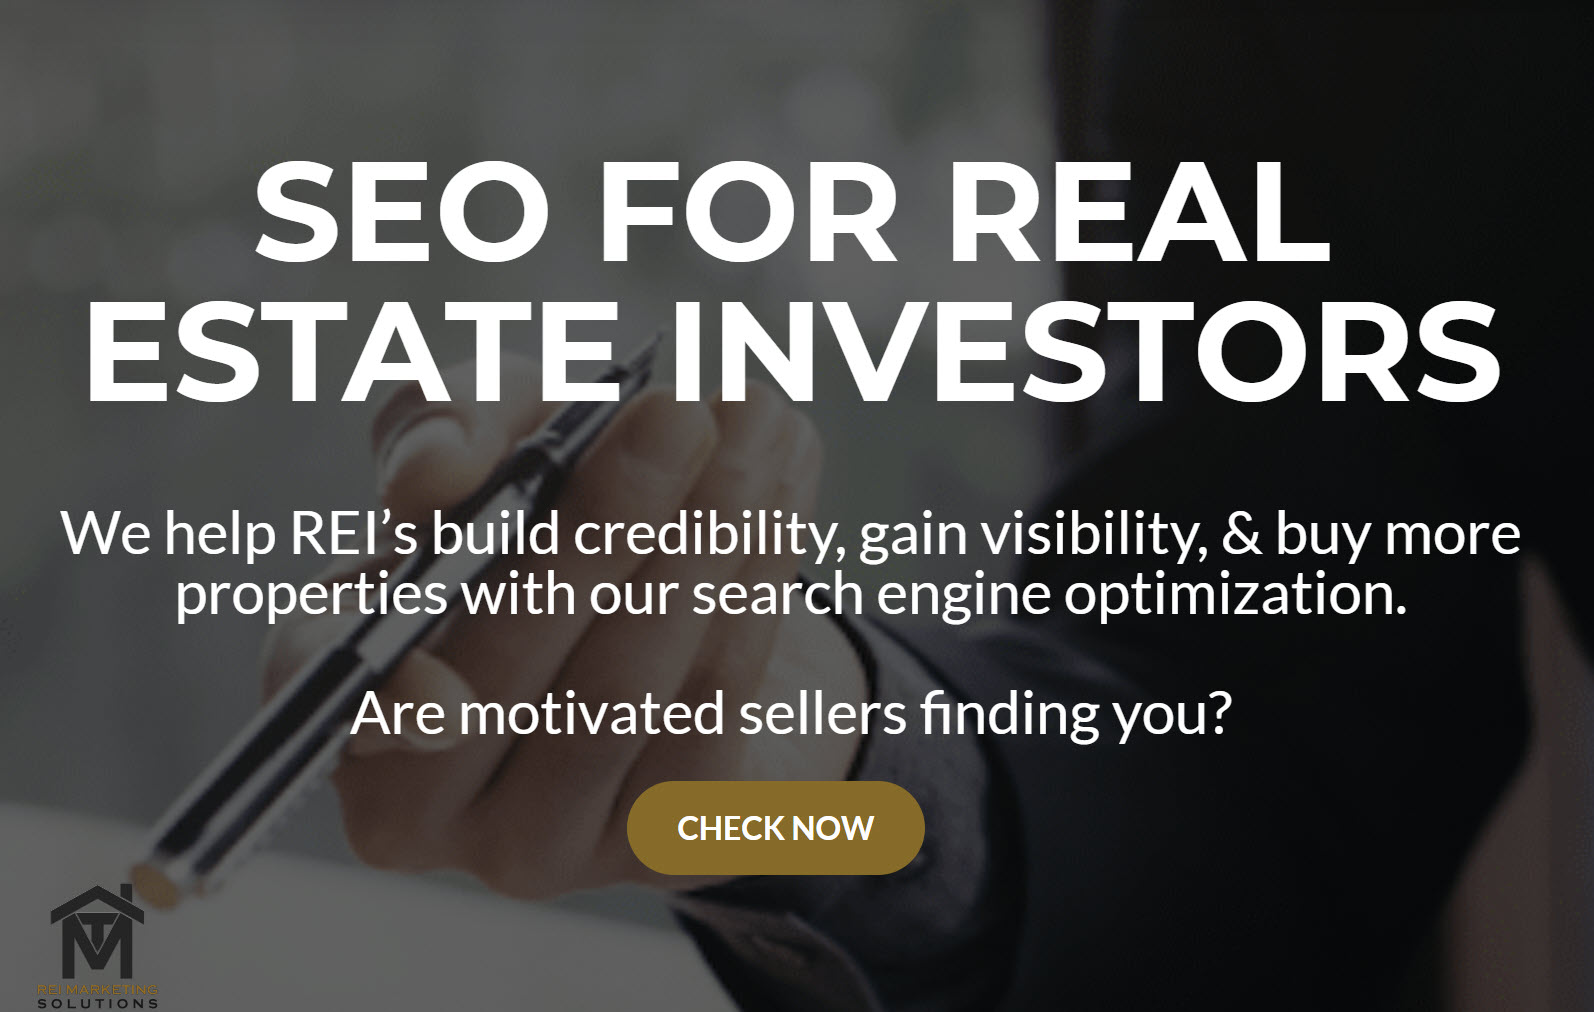 Moss Technologies Announces New Real Estate Investor SEO Division